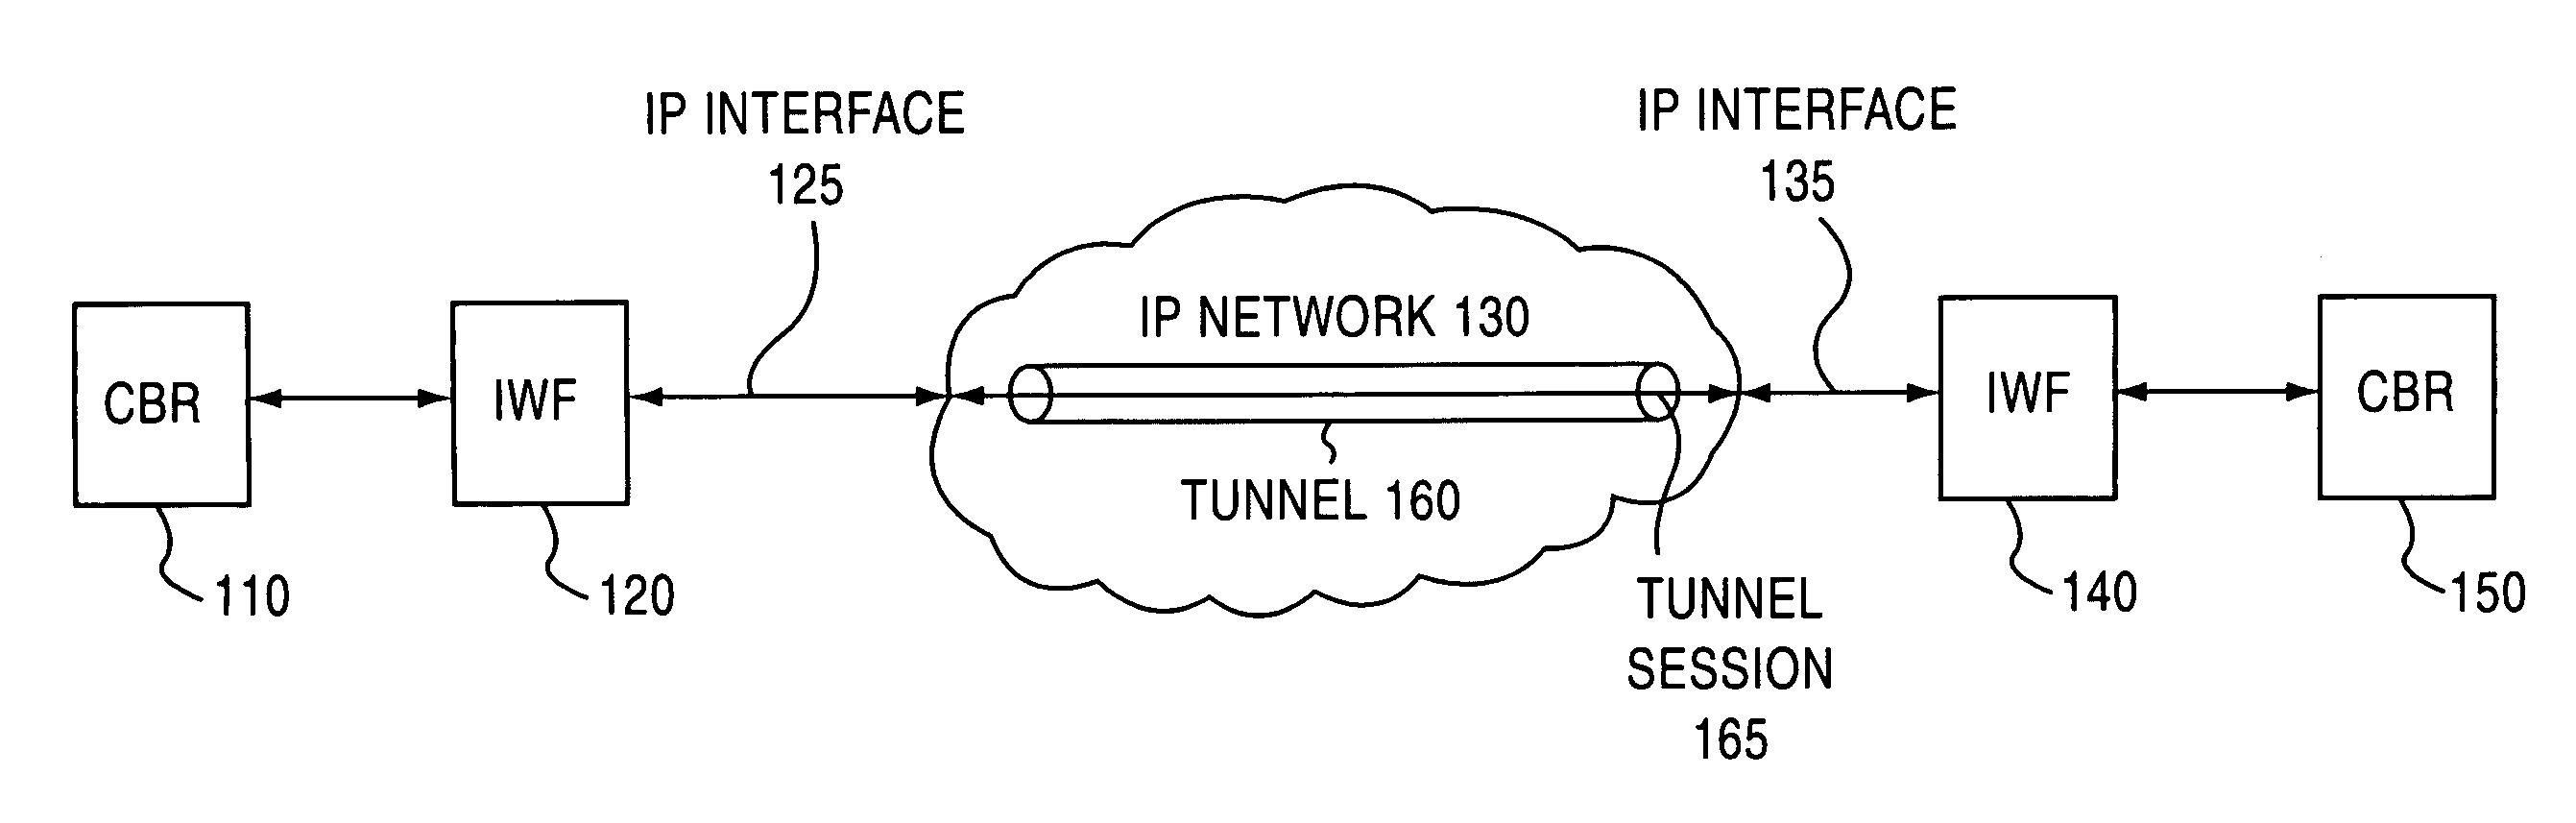 Jitter buffer for a circuit emulation service over an internet protocol network